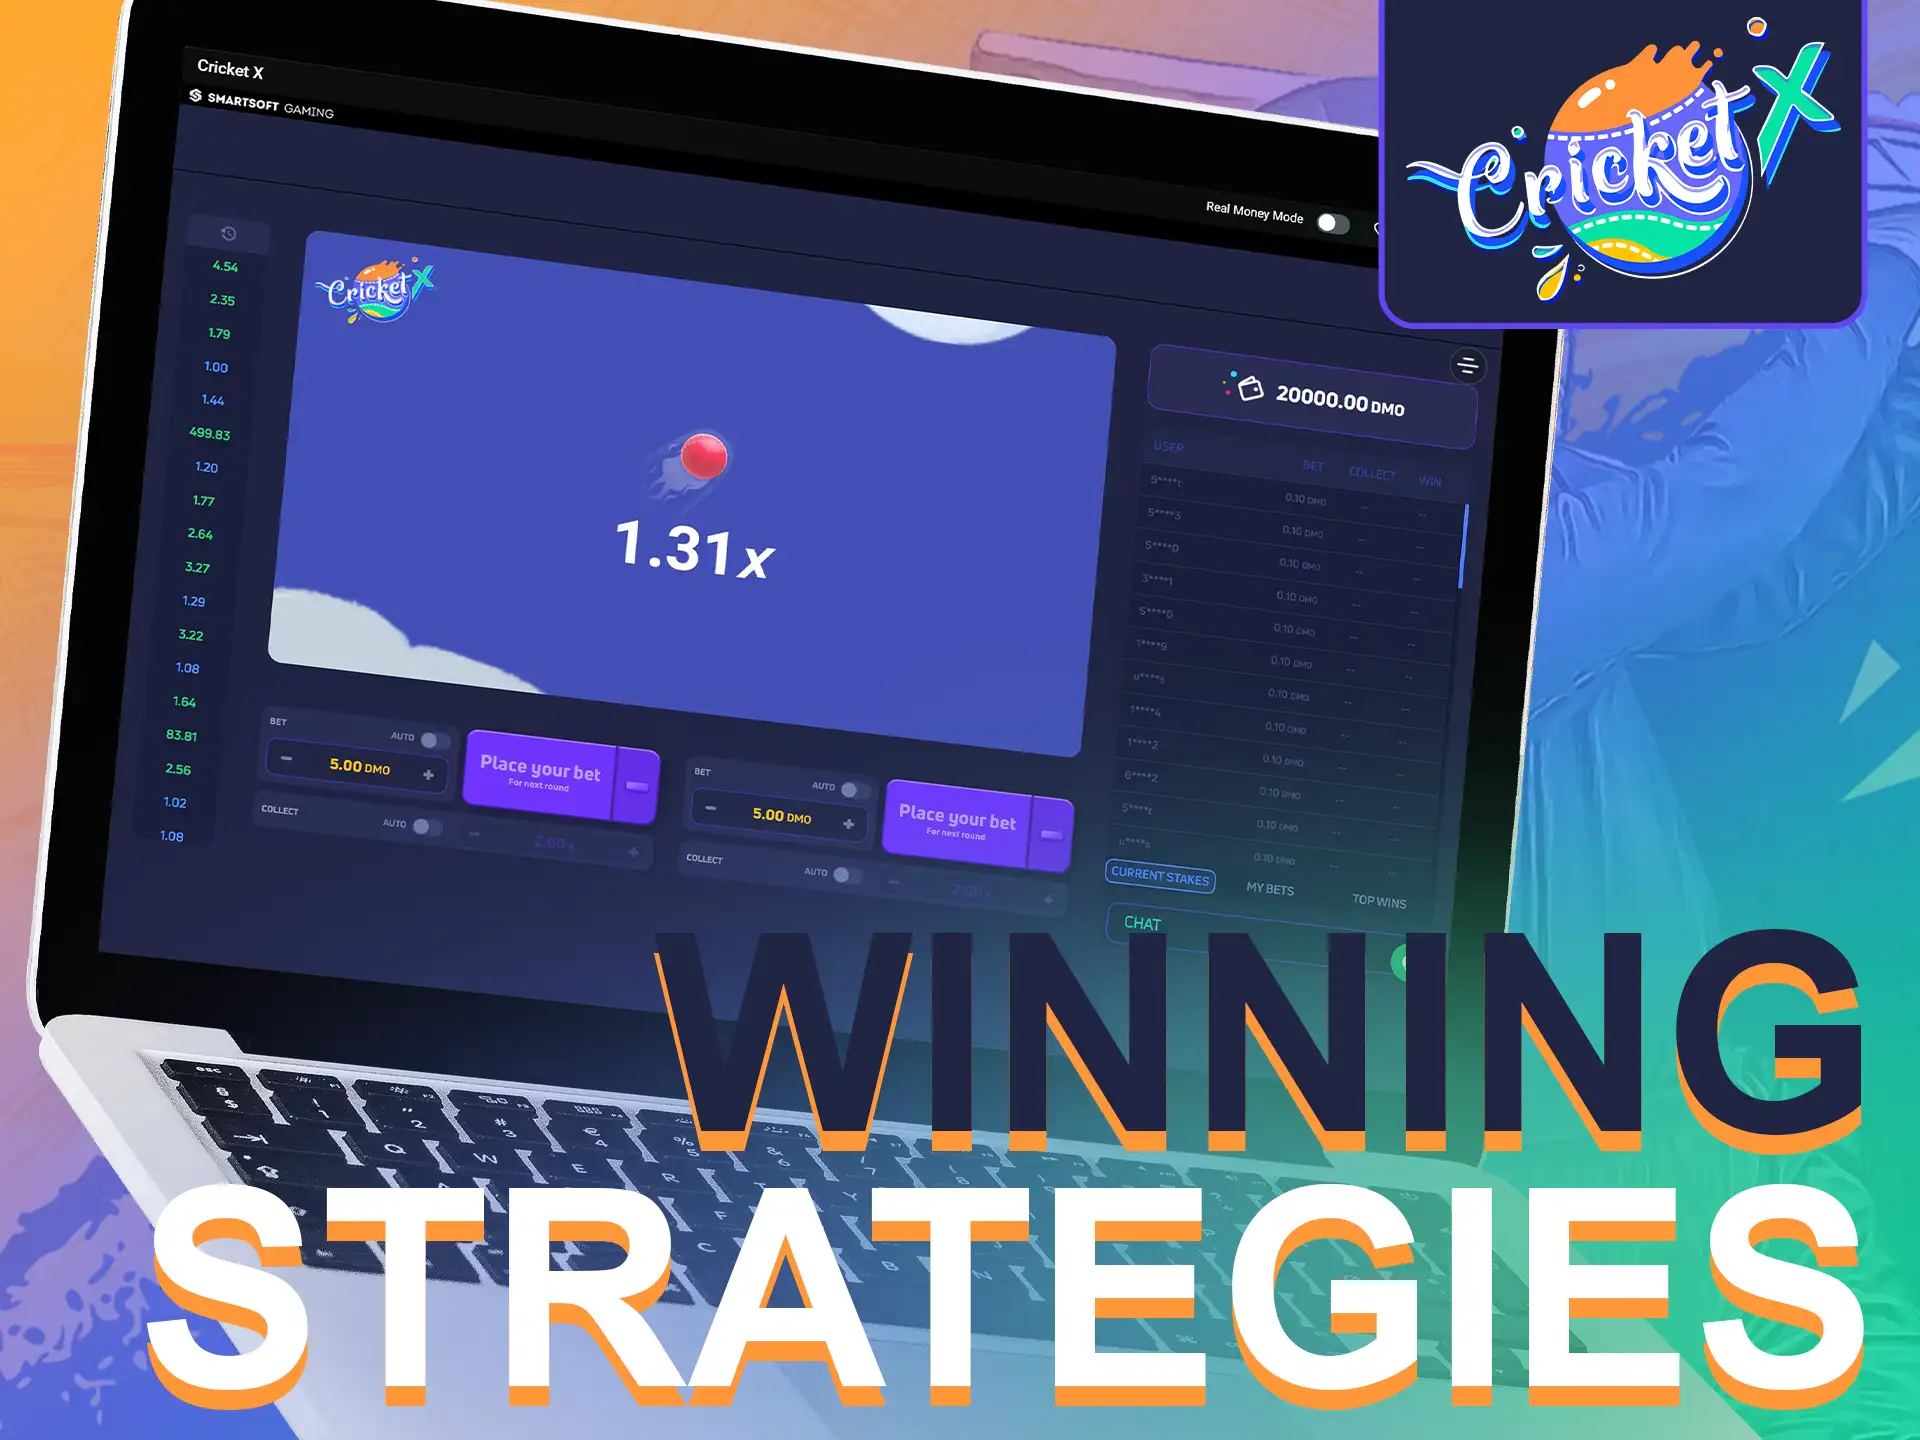 To claim big winnings use the suggested strategy options.